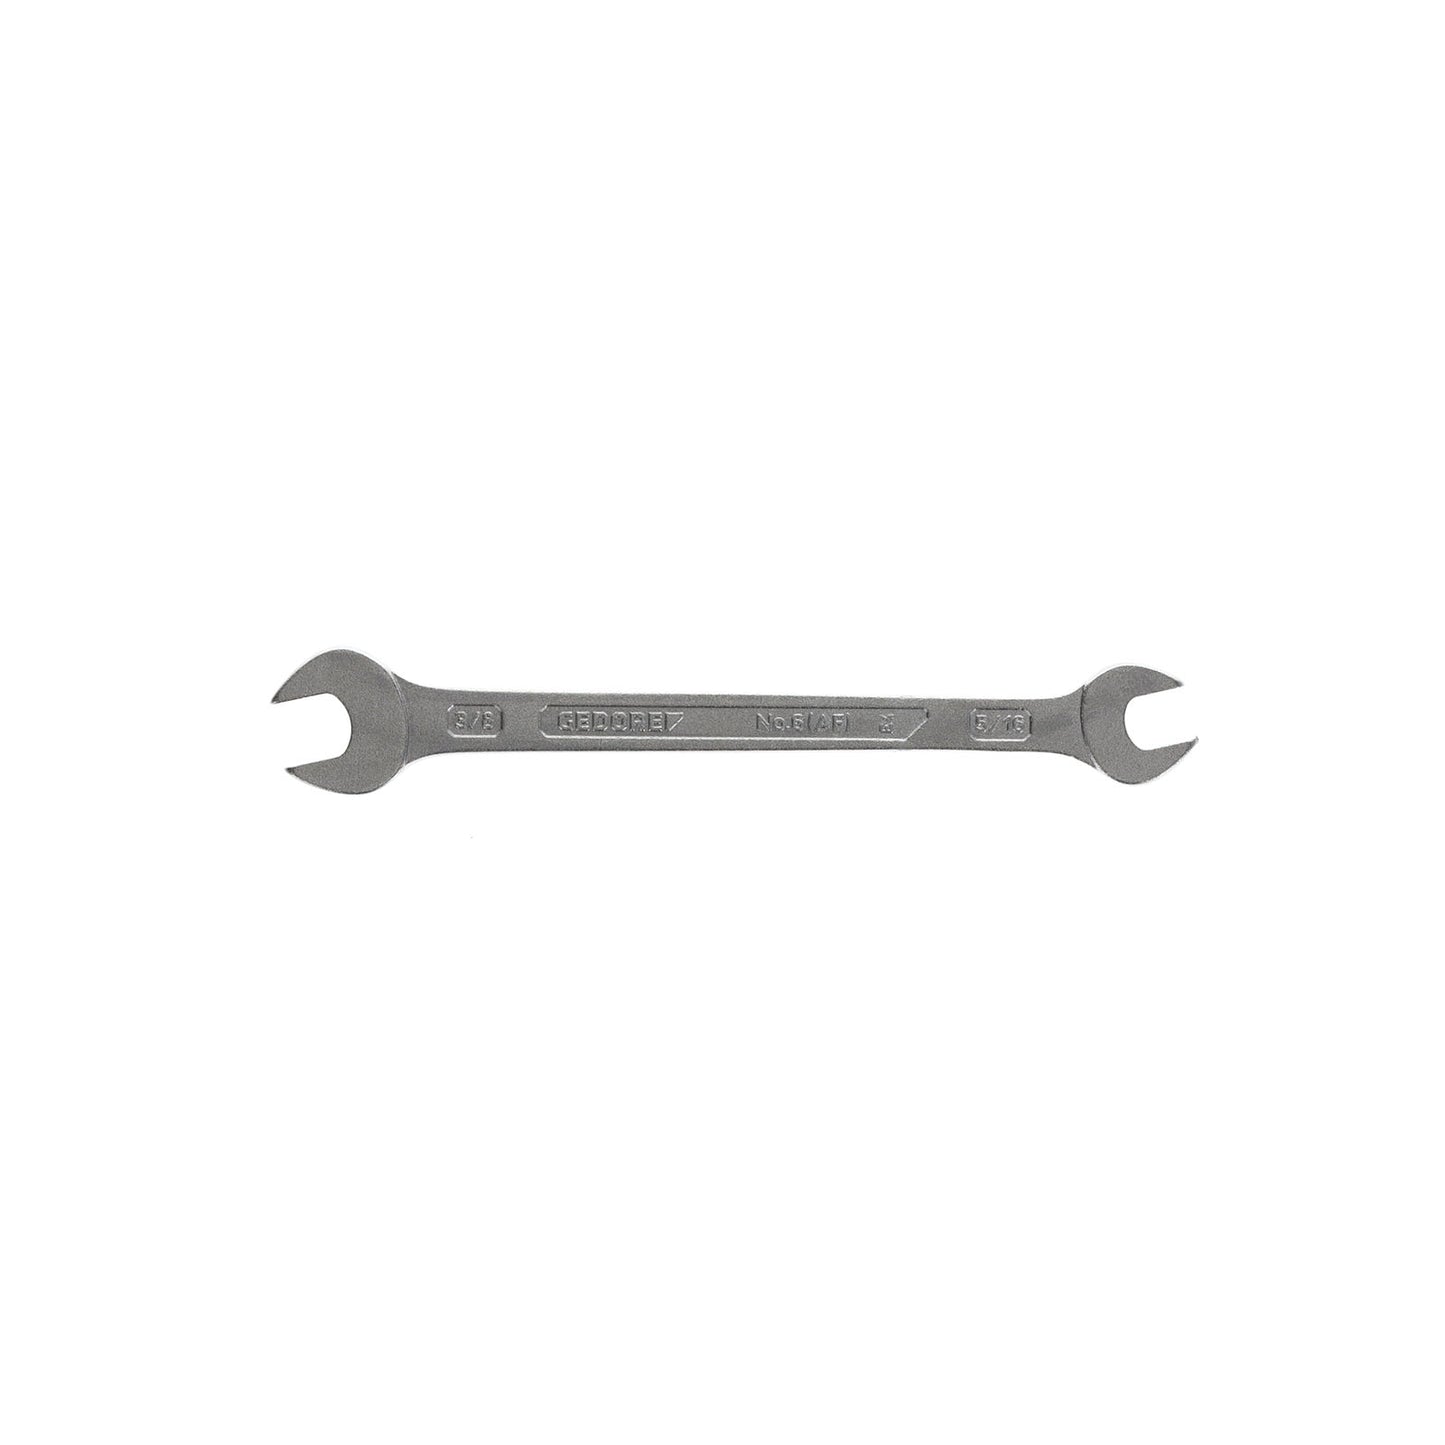 GEDORE 6 5/16X3/8AF - 2-Mount Fixed Wrench, 5/16x3/8AF (6070100)